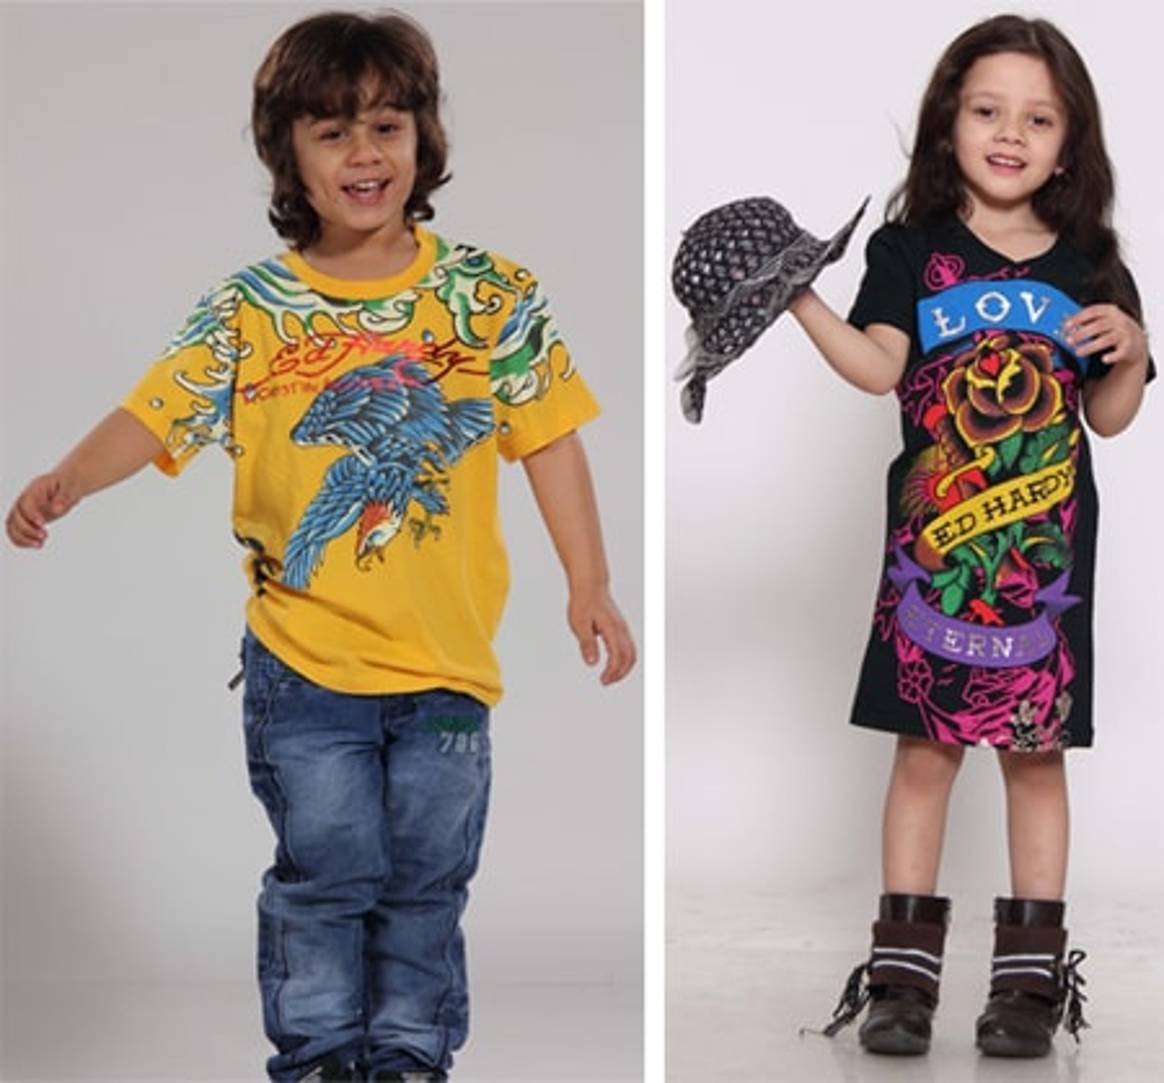 MangoStreet.com: Aiming to be the largest kids’ e-retailer